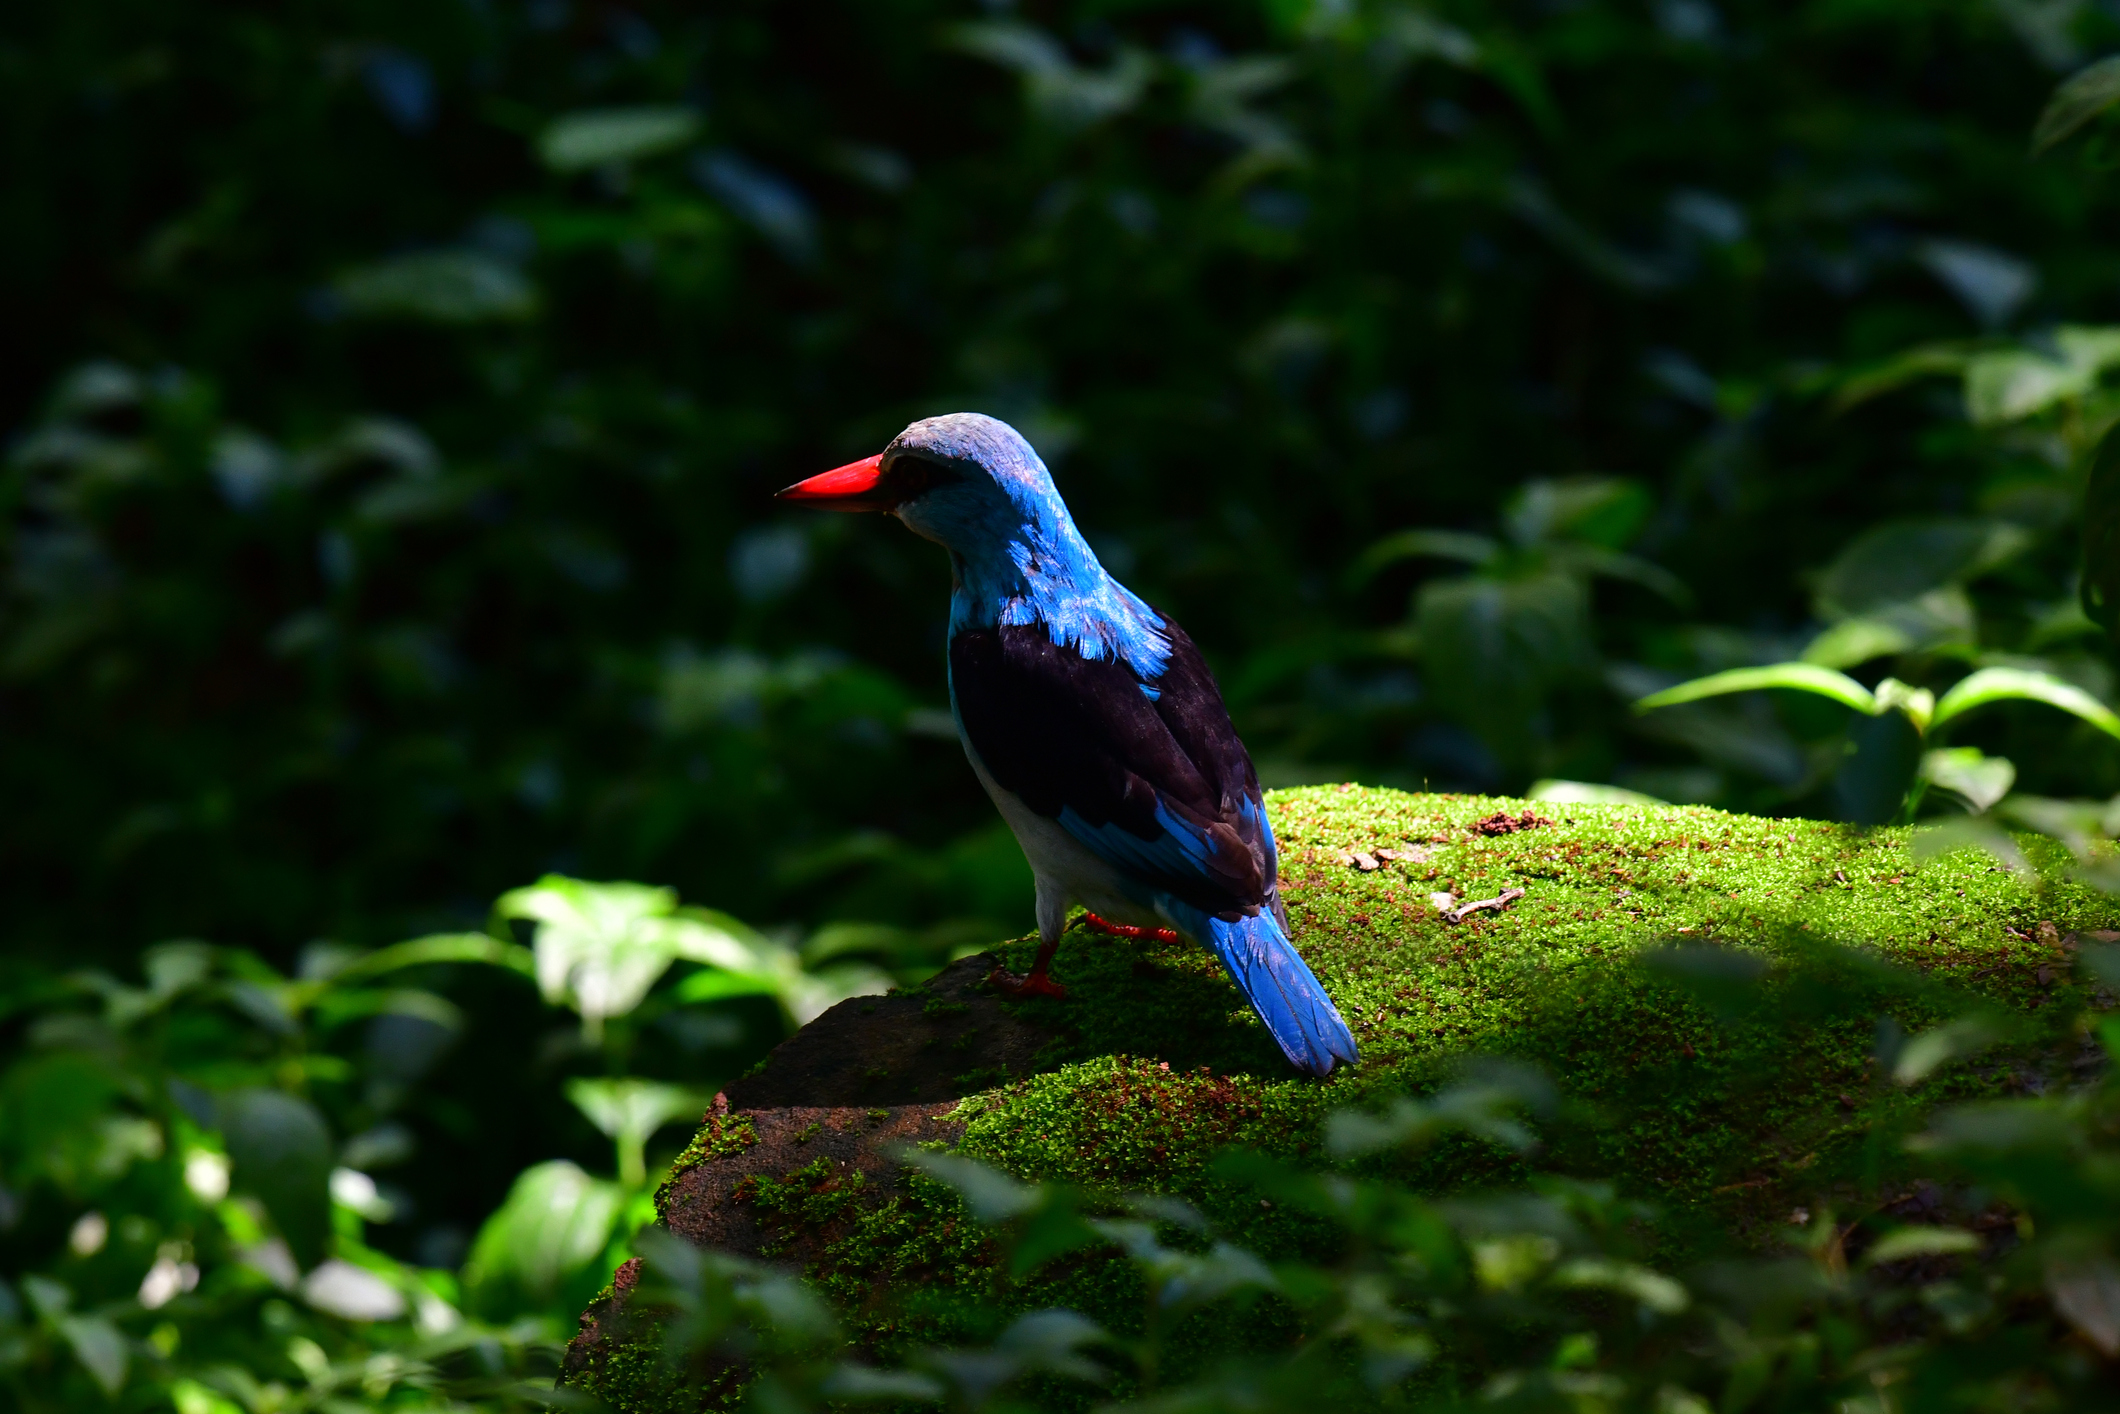 A Blue-breasted kingfisher in the Budongo Forest reserve, a key biodiversity area in Uganda. (Michele D'Amico—Getty Images)